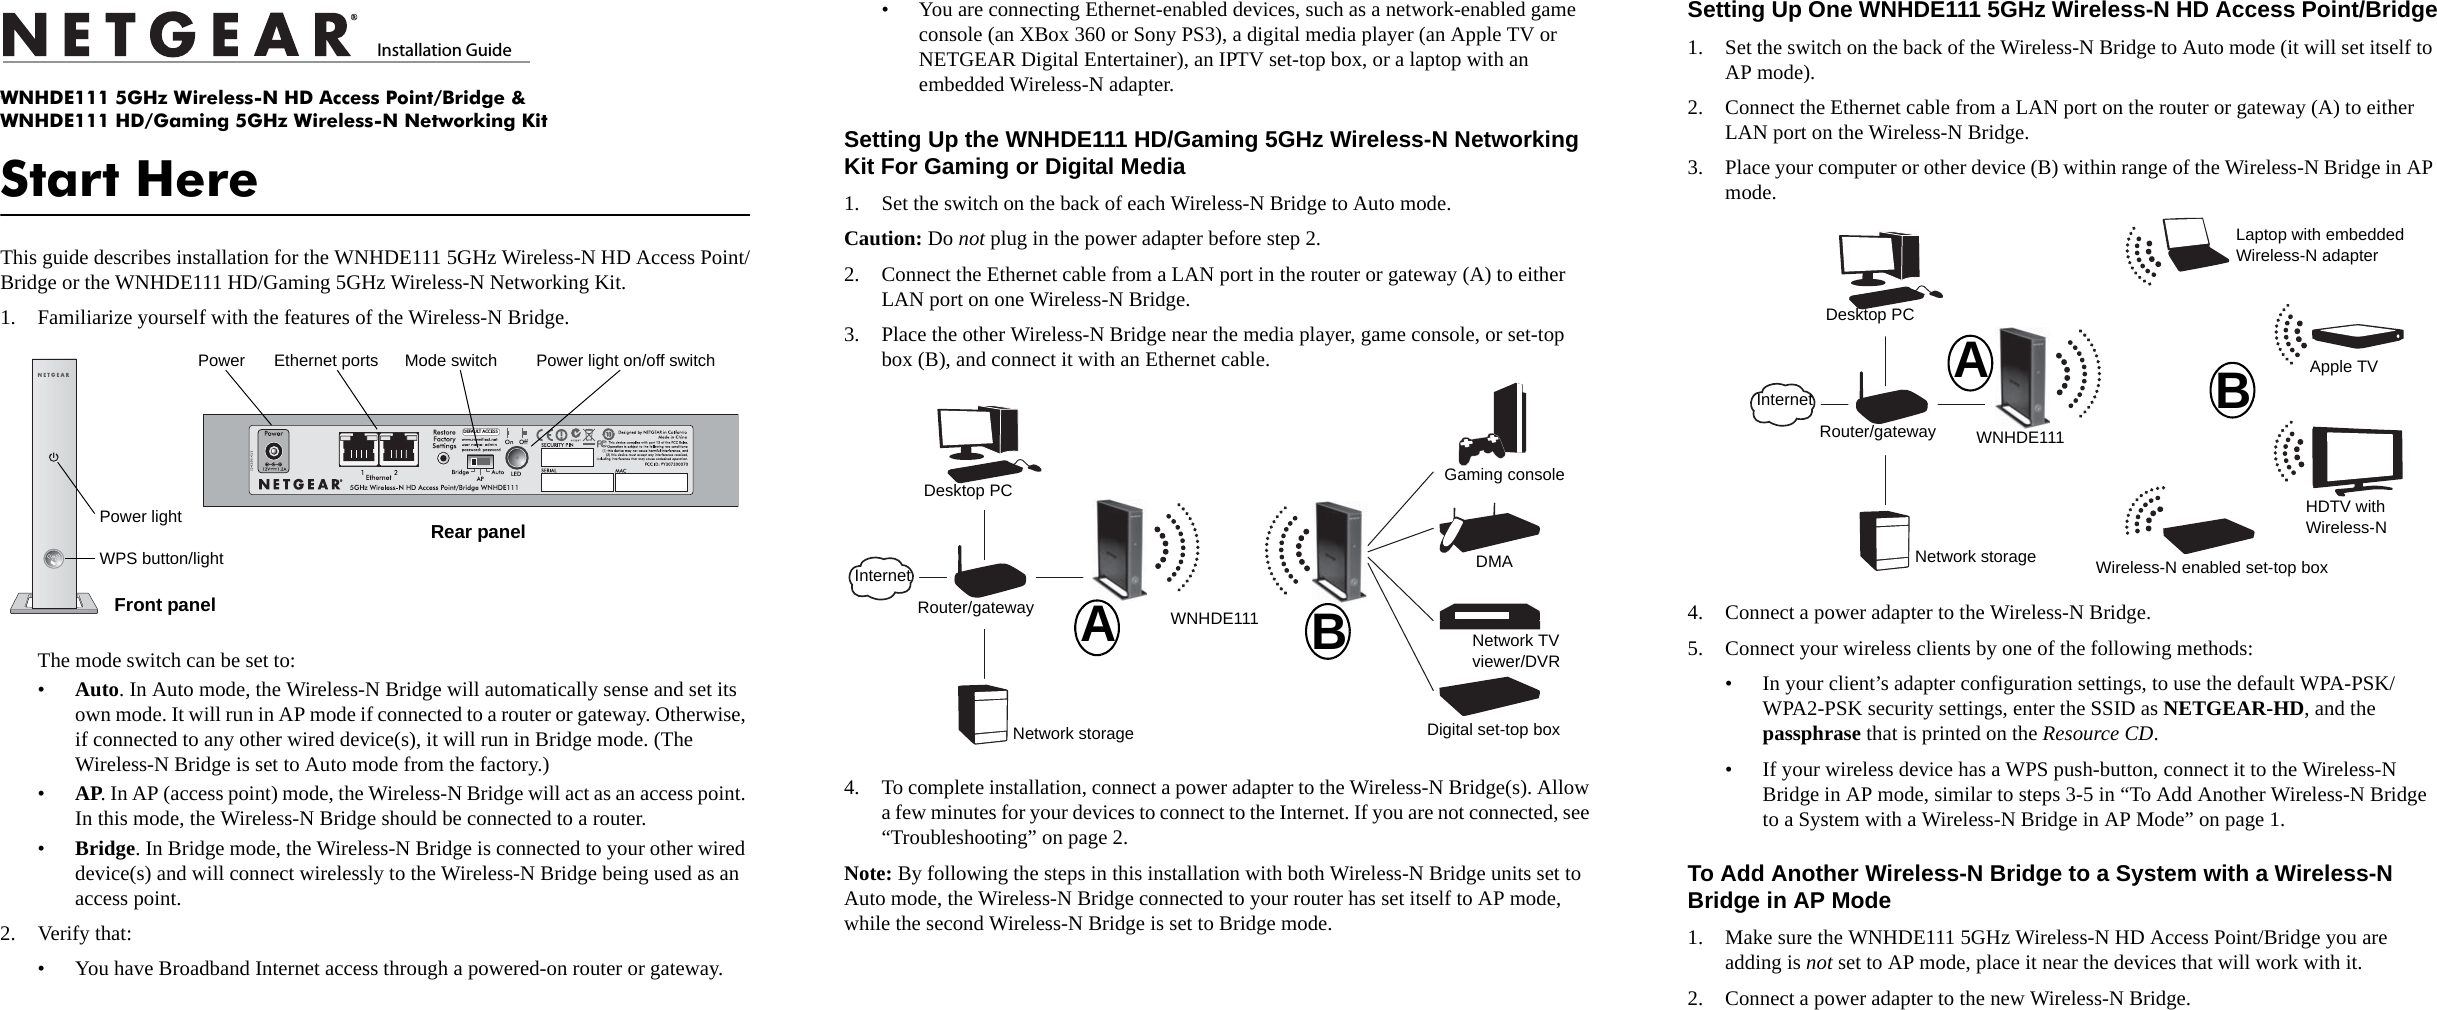 )NSTALLATION&apos;UIDETWNHDE111 5GHz Wireless-N HD Access Point/Bridge &amp; WNHDE111 HD/Gaming 5GHz Wireless-N Networking KitStart HereThis guide describes installation for the WNHDE111 5GHz Wireless-N HD Access Point/Bridge or the WNHDE111 HD/Gaming 5GHz Wireless-N Networking Kit. 1. Familiarize yourself with the features of the Wireless-N Bridge. The mode switch can be set to:•Auto. In Auto mode, the Wireless-N Bridge will automatically sense and set its own mode. It will run in AP mode if connected to a router or gateway. Otherwise, if connected to any other wired device(s), it will run in Bridge mode. (The Wireless-N Bridge is set to Auto mode from the factory.)•AP. In AP (access point) mode, the Wireless-N Bridge will act as an access point. In this mode, the Wireless-N Bridge should be connected to a router. •Bridge. In Bridge mode, the Wireless-N Bridge is connected to your other wired device(s) and will connect wirelessly to the Wireless-N Bridge being used as an access point.2. Verify that:• You have Broadband Internet access through a powered-on router or gateway.DEFAULT ACCESSPower Ethernet ports Mode switch Power light on/off switchRear panelFront panelPower lightWPS button/light• You are connecting Ethernet-enabled devices, such as a network-enabled game console (an XBox 360 or Sony PS3), a digital media player (an Apple TV or NETGEAR Digital Entertainer), an IPTV set-top box, or a laptop with an embedded Wireless-N adapter. Setting Up the WNHDE111 HD/Gaming 5GHz Wireless-N Networking Kit For Gaming or Digital Media 1. Set the switch on the back of each Wireless-N Bridge to Auto mode.Caution: Do not plug in the power adapter before step 2.2. Connect the Ethernet cable from a LAN port in the router or gateway (A) to either LAN port on one Wireless-N Bridge. 3. Place the other Wireless-N Bridge near the media player, game console, or set-top box (B), and connect it with an Ethernet cable.4. To complete installation, connect a power adapter to the Wireless-N Bridge(s). Allow a few minutes for your devices to connect to the Internet. If you are not connected, see “Troubleshooting” on page 2.Note: By following the steps in this installation with both Wireless-N Bridge units set to Auto mode, the Wireless-N Bridge connected to your router has set itself to AP mode, while the second Wireless-N Bridge is set to Bridge mode.ABDigital set-top boxNetwork TV viewer/DVRDMAGaming consoleWNHDE111Network storageRouter/gatewayDesktop PCInternetSetting Up One WNHDE111 5GHz Wireless-N HD Access Point/Bridge1. Set the switch on the back of the Wireless-N Bridge to Auto mode (it will set itself to AP mode).2. Connect the Ethernet cable from a LAN port on the router or gateway (A) to either LAN port on the Wireless-N Bridge. 3. Place your computer or other device (B) within range of the Wireless-N Bridge in AP mode.4. Connect a power adapter to the Wireless-N Bridge. 5. Connect your wireless clients by one of the following methods: • In your client’s adapter configuration settings, to use the default WPA-PSK/WPA2-PSK security settings, enter the SSID as NETGEAR-HD, and the passphrase that is printed on the Resource CD. • If your wireless device has a WPS push-button, connect it to the Wireless-N Bridge in AP mode, similar to steps 3-5 in “To Add Another Wireless-N Bridge to a System with a Wireless-N Bridge in AP Mode” on page 1.To Add Another Wireless-N Bridge to a System with a Wireless-N Bridge in AP Mode1. Make sure the WNHDE111 5GHz Wireless-N HD Access Point/Bridge you are adding is not set to AP mode, place it near the devices that will work with it.2. Connect a power adapter to the new Wireless-N Bridge.ABWNHDE111Network storageRouter/gatewayDesktop PCInternetLaptop with embedded Wireless-N adapterHDTV with Wireless-NWireless-N enabled set-top boxApple TV